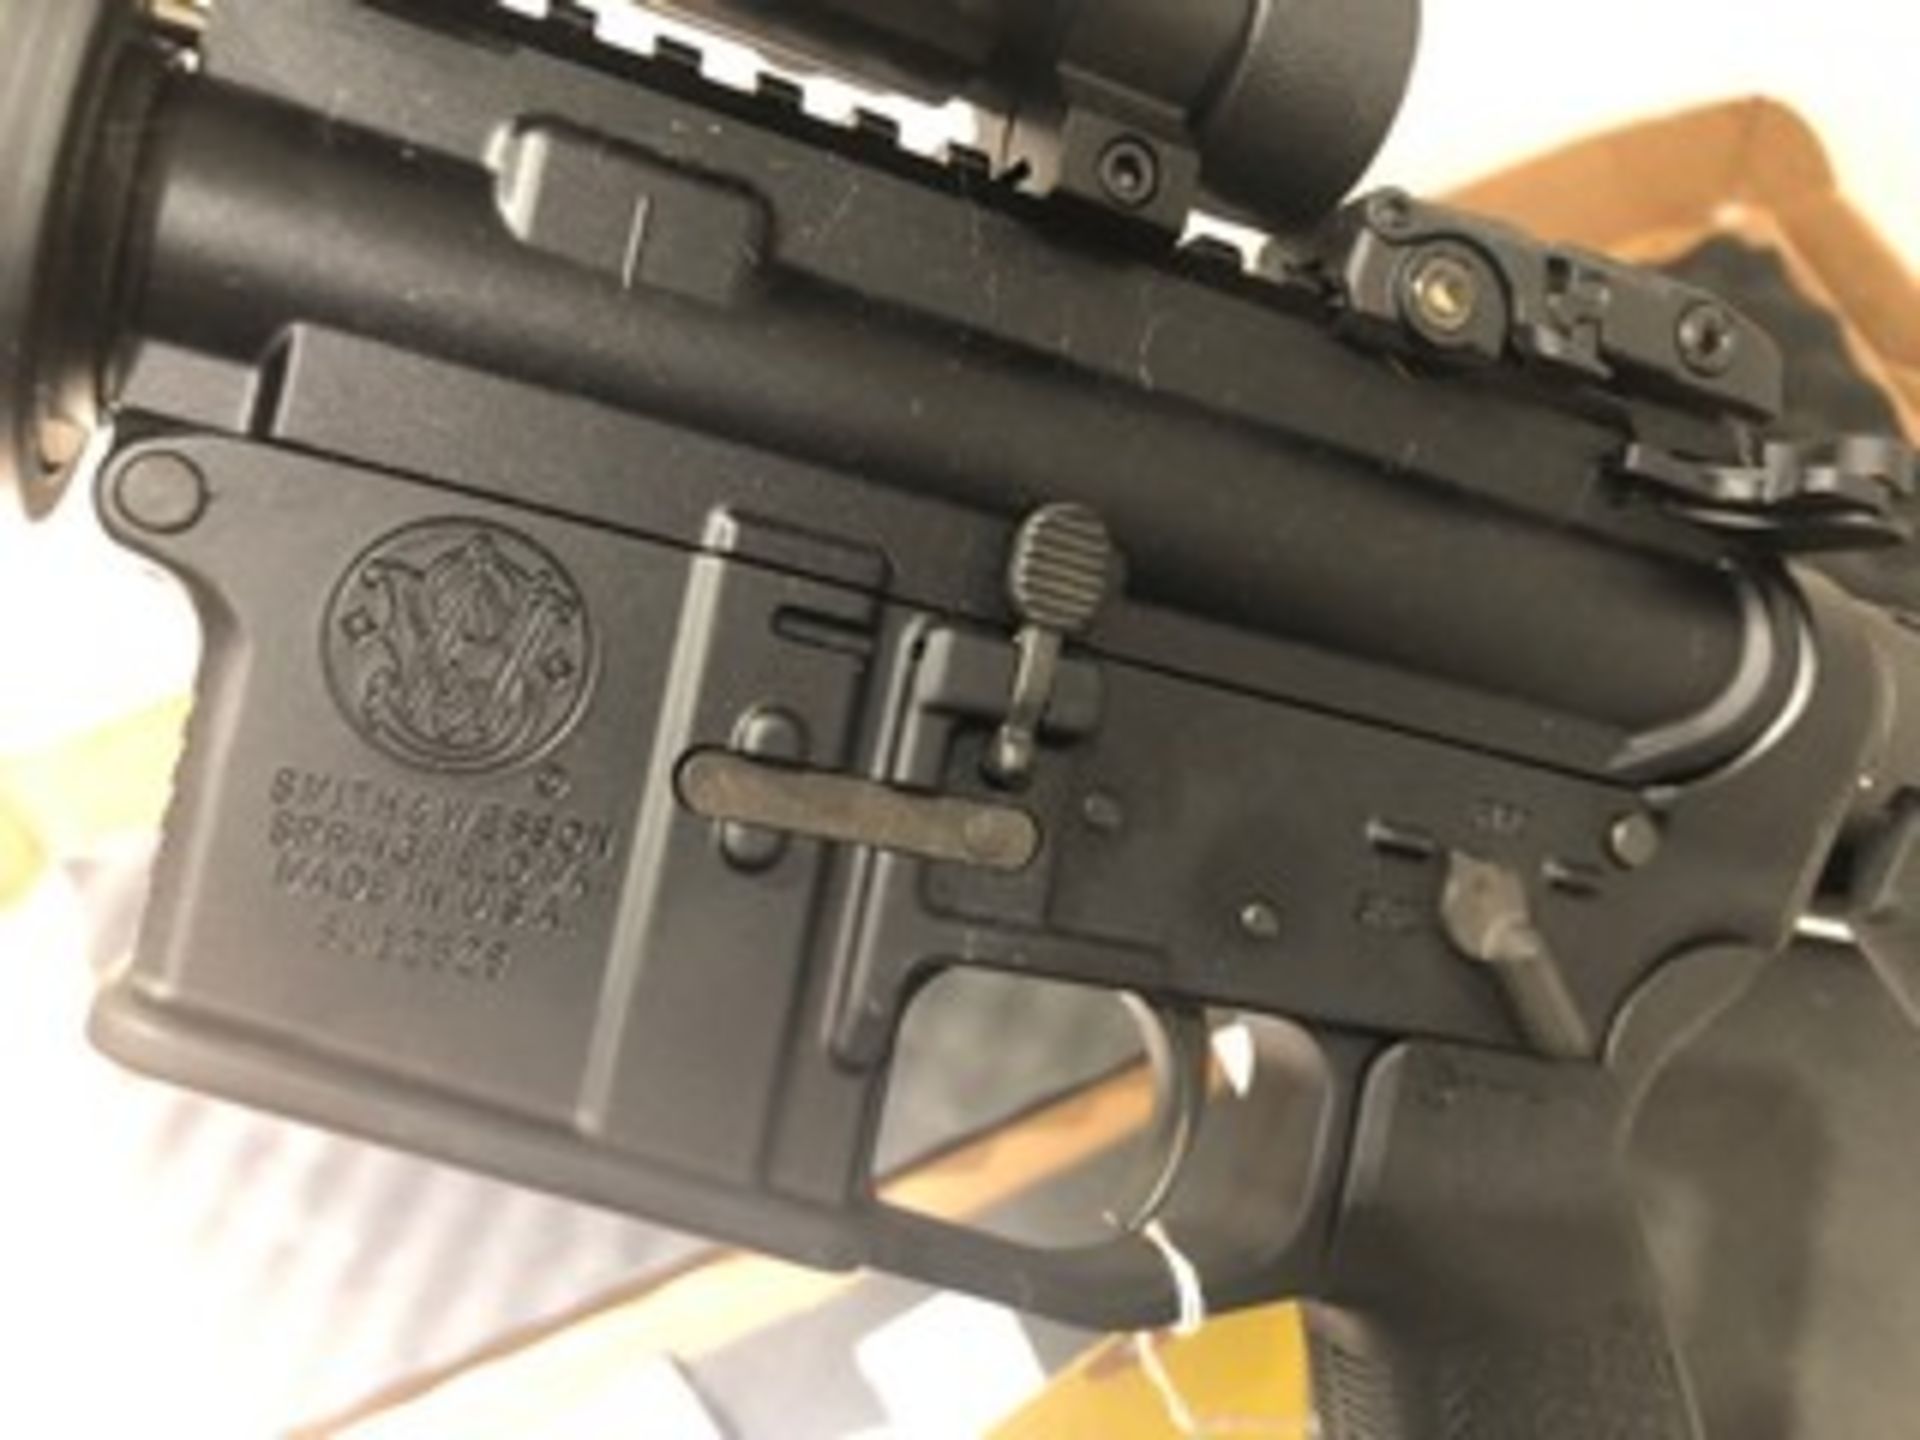 SMITH & WESSON M&P15 AR-15 - BSA TW30RD TACTICAL SCOPE / NEVER FIRED - SERIAL No. SU12628 - Image 3 of 5